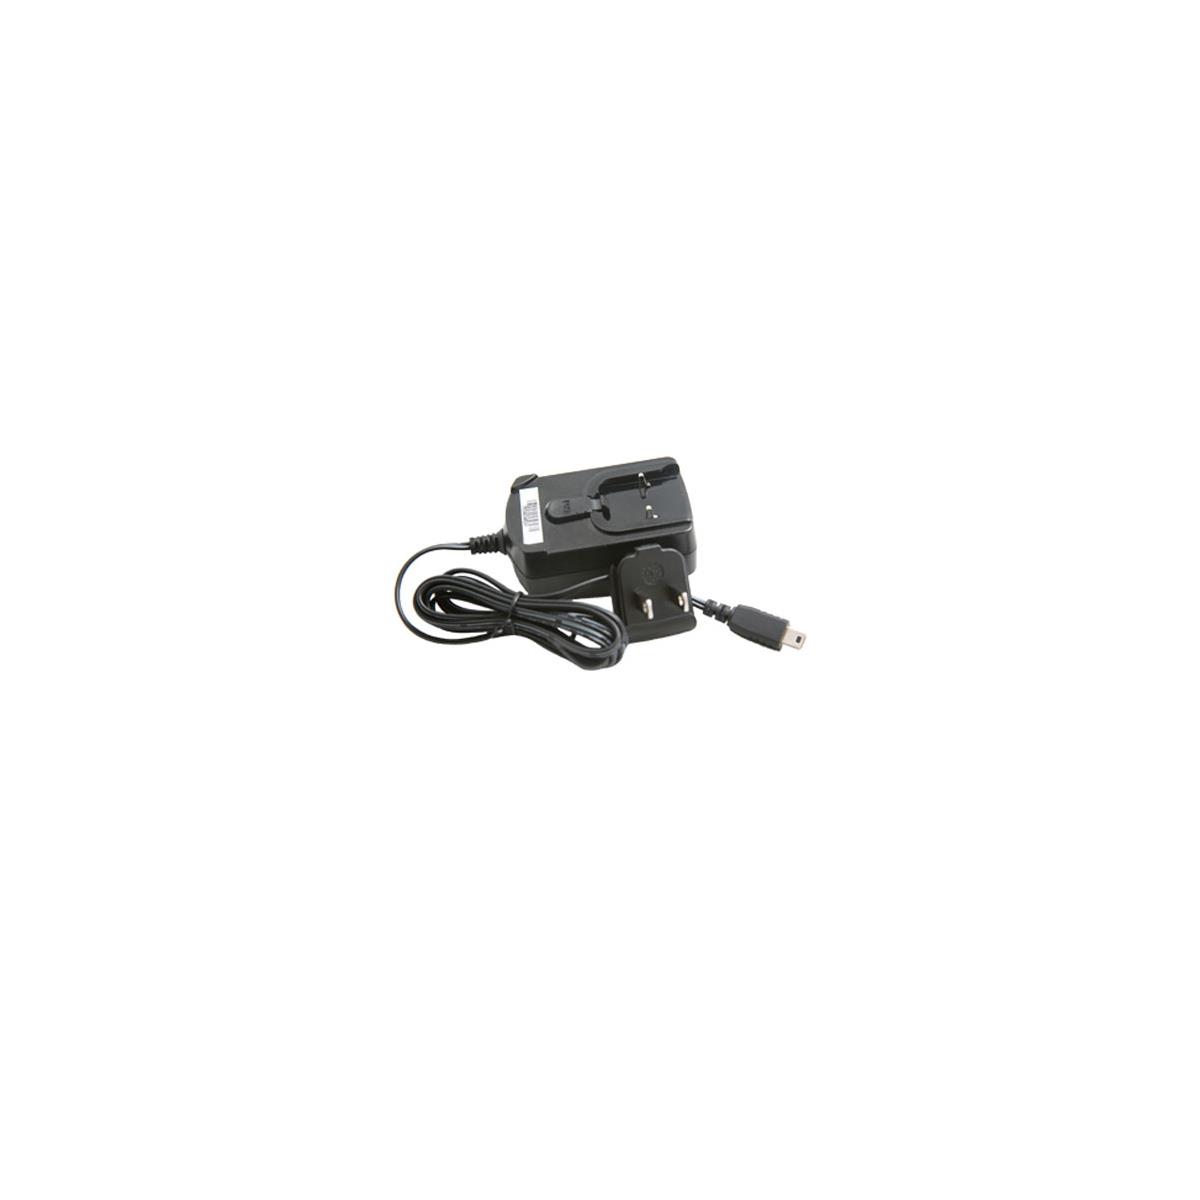 Image of PocketWizard PW-AC-USB Plug-In AC Adapter with USB Plug for MultiMAX Units